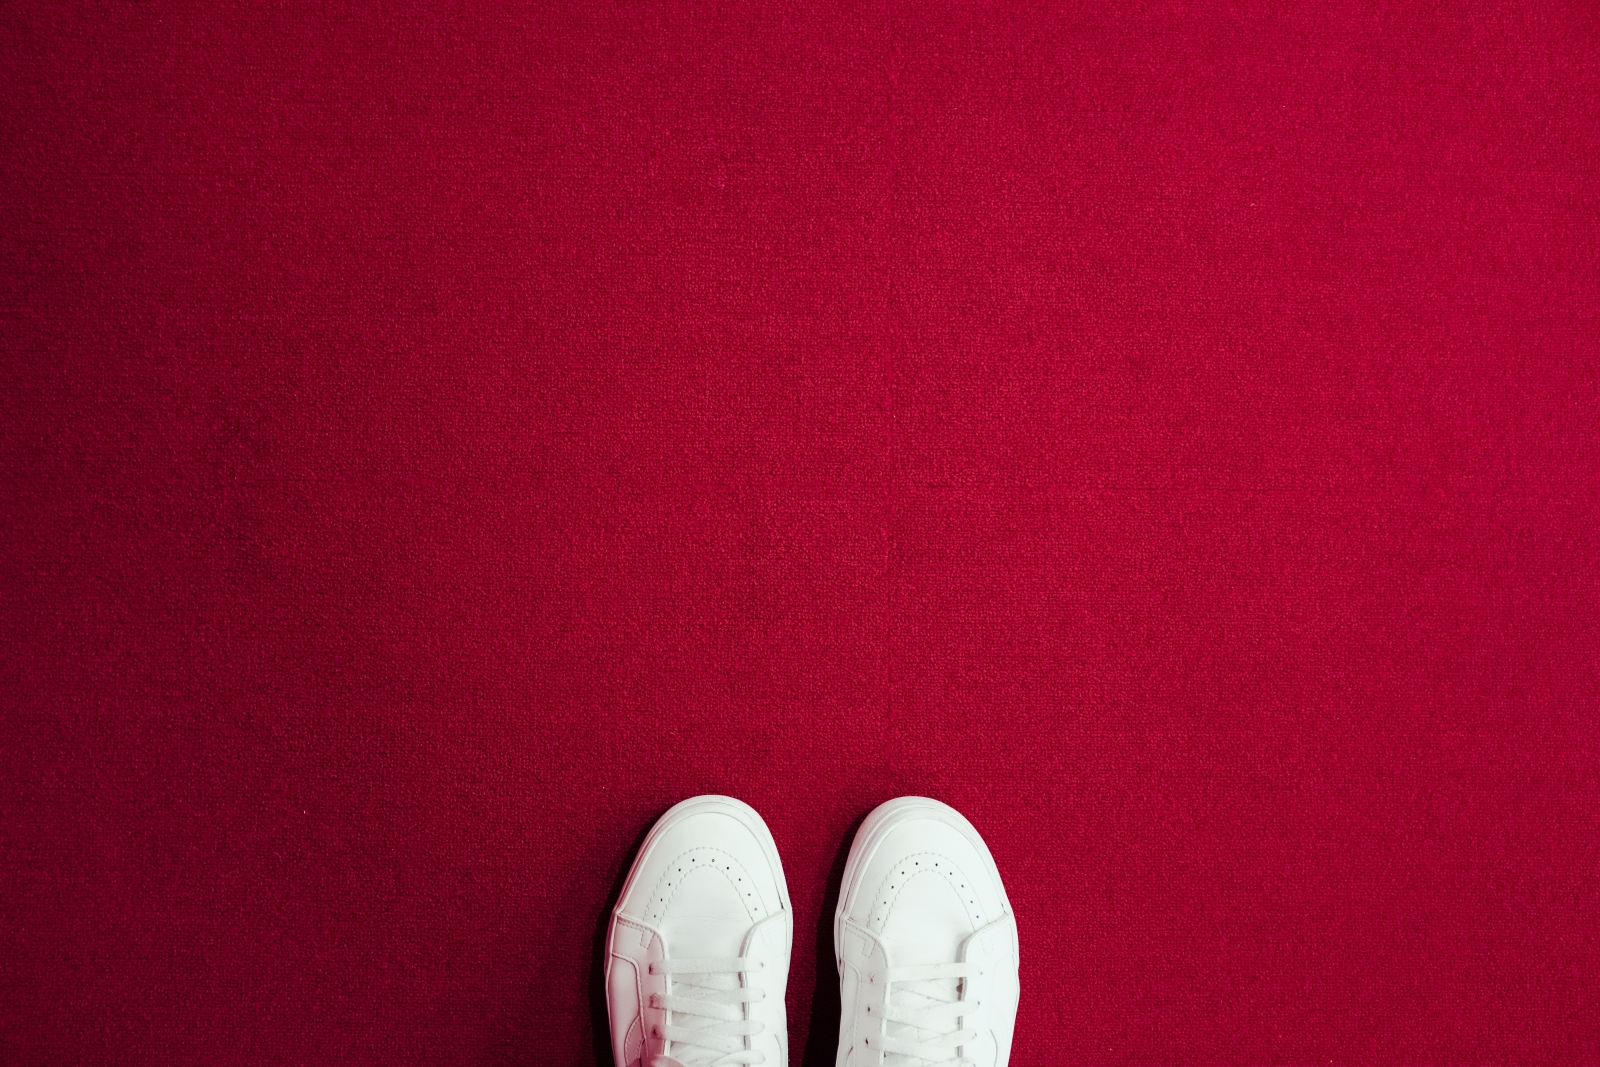 White sneakers on a red carpet. Photo by Christian Chen/Unsplash.